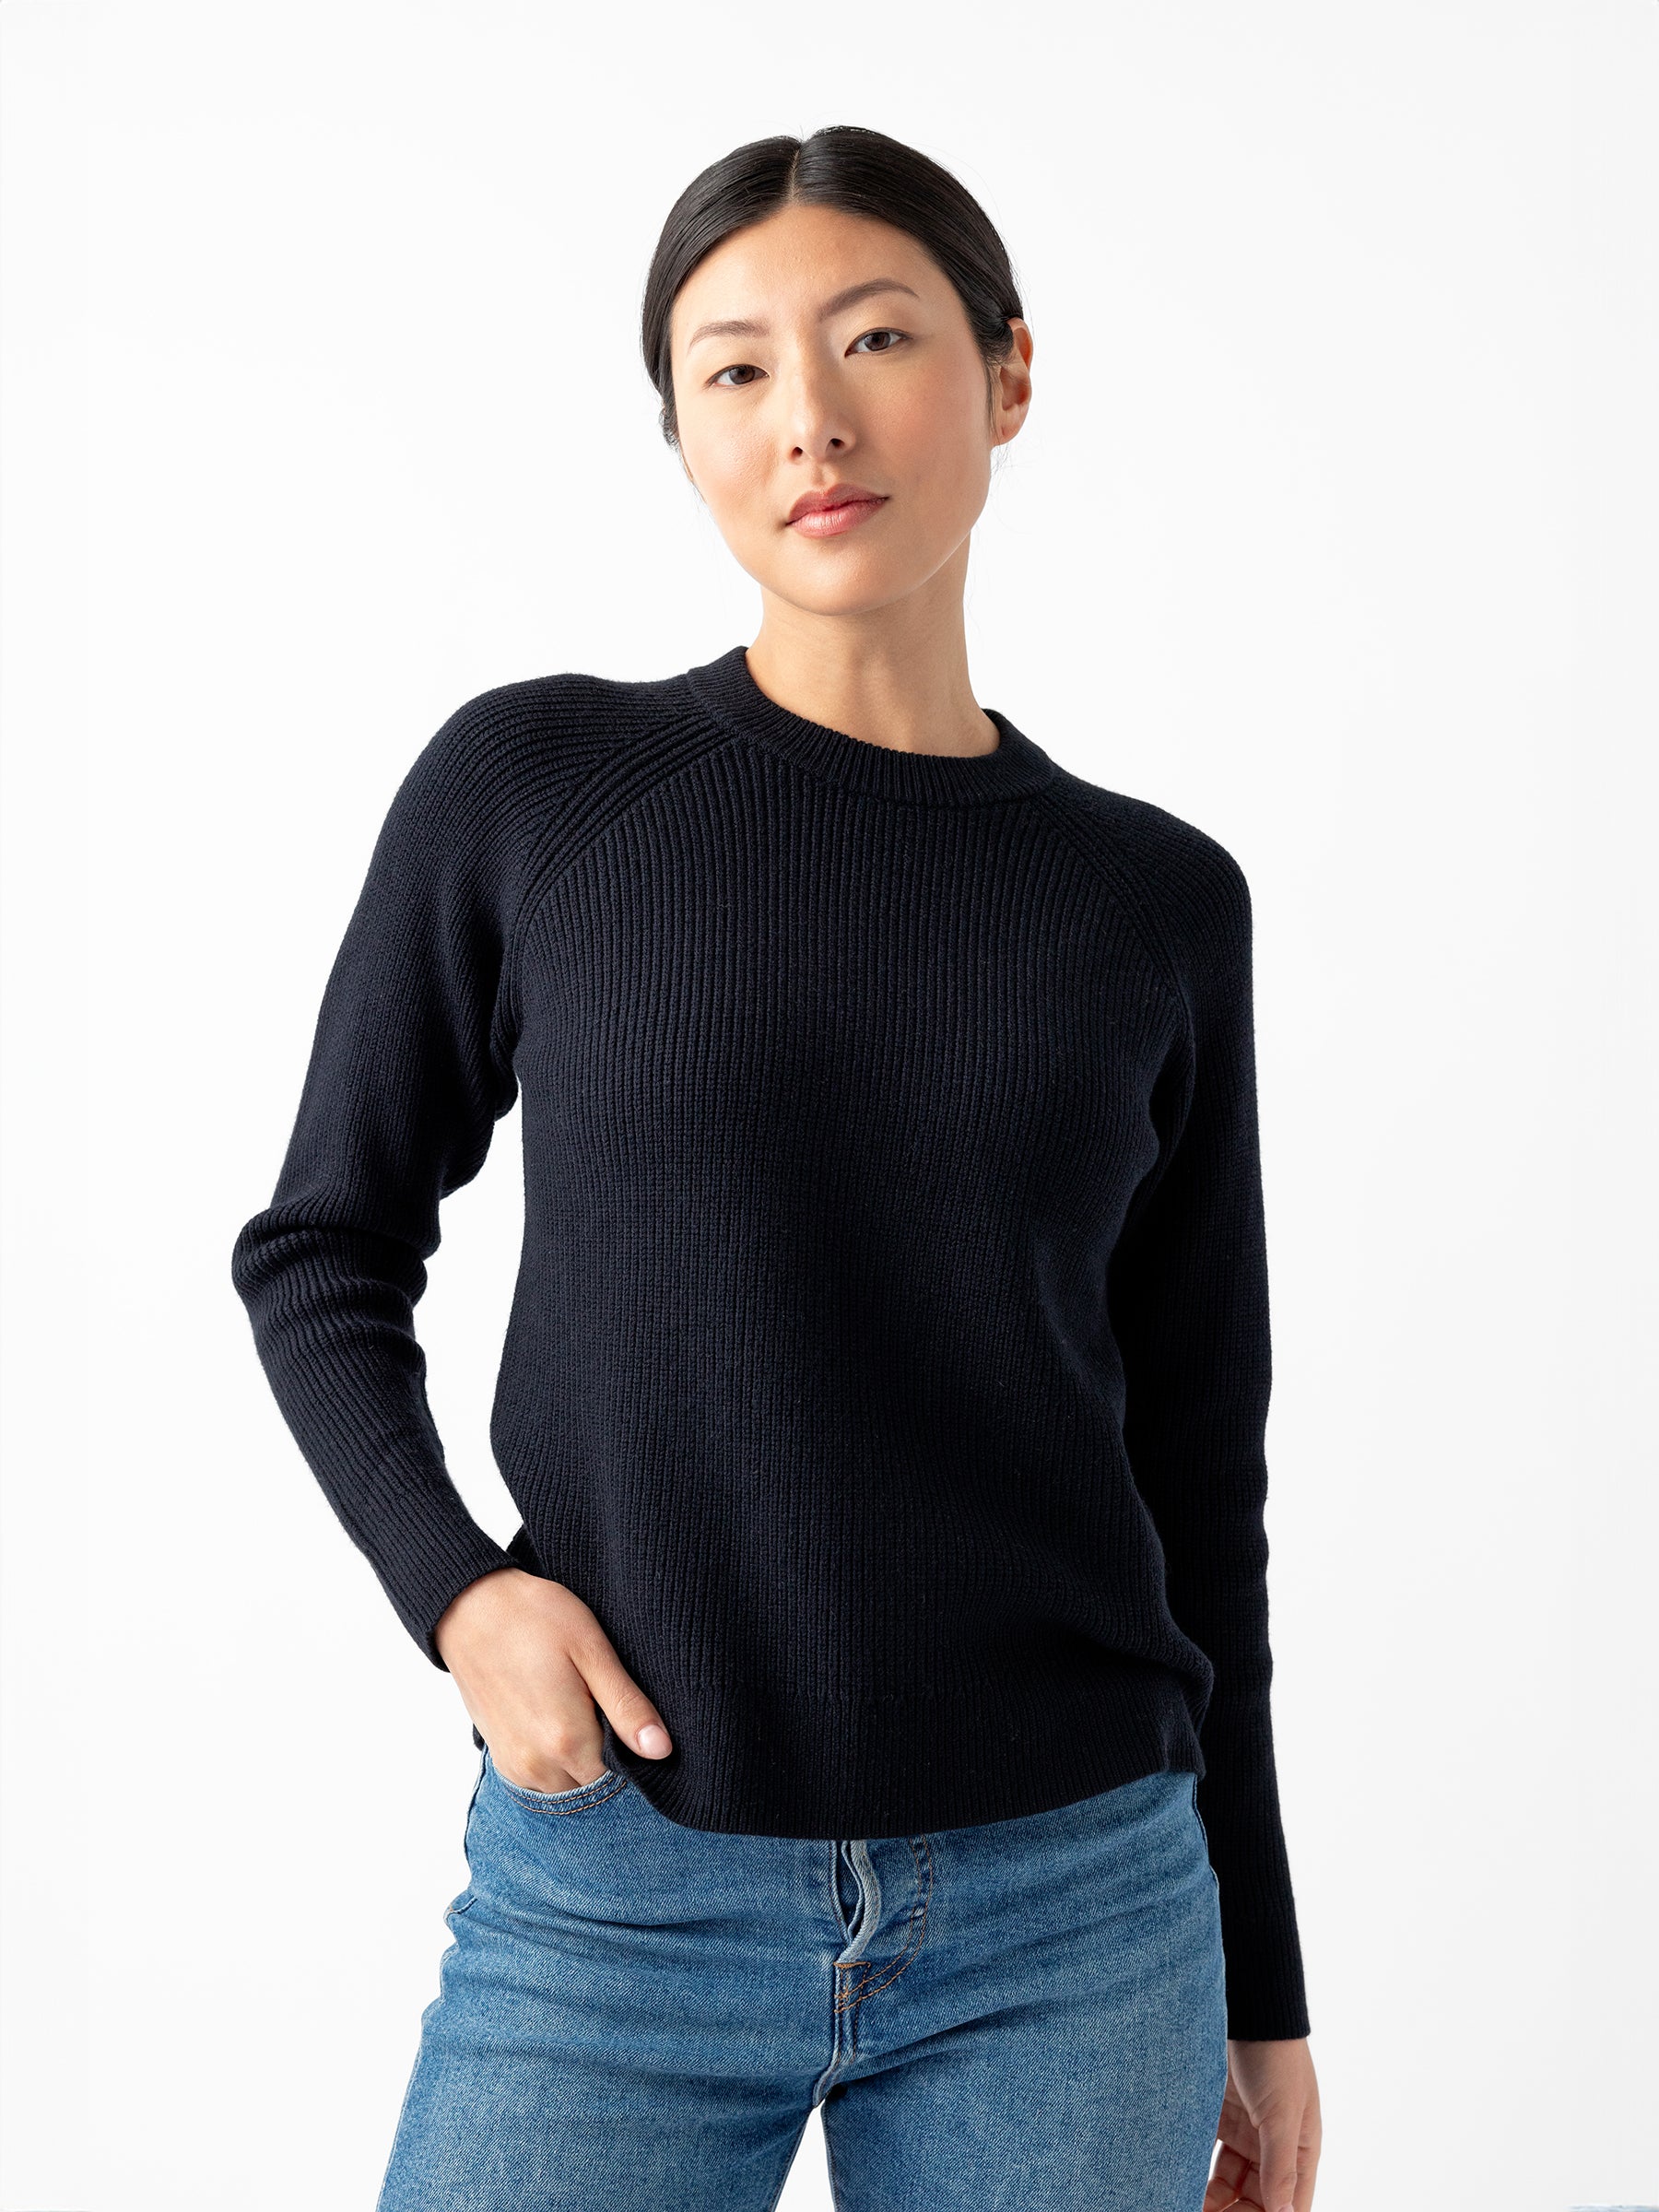 A woman with straight, dark hair is standing against a plain white background. She is wearing Cozy Earth's Women's Classic Crewneck, a knitted long-sleeve dark sweater, paired with blue jeans. Her left hand is in her pocket, and she maintains a neutral expression with her lips closed. |Color:Jet Black